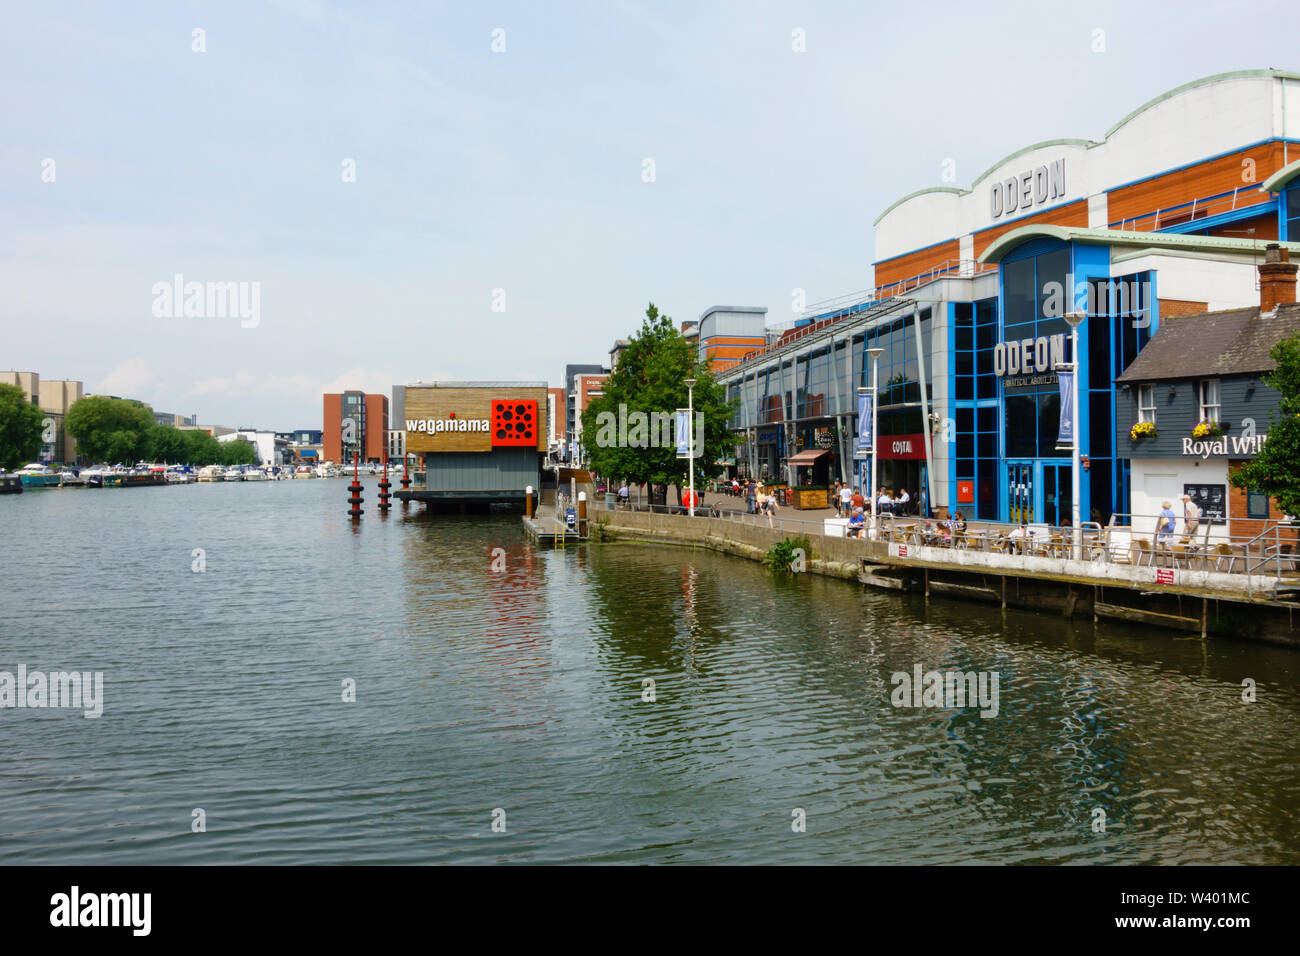 Odeon cinema and Wagamama restaurant on Brayford Pool, Lincoln, Lincolnshire, England. July 2019 Stock Photo